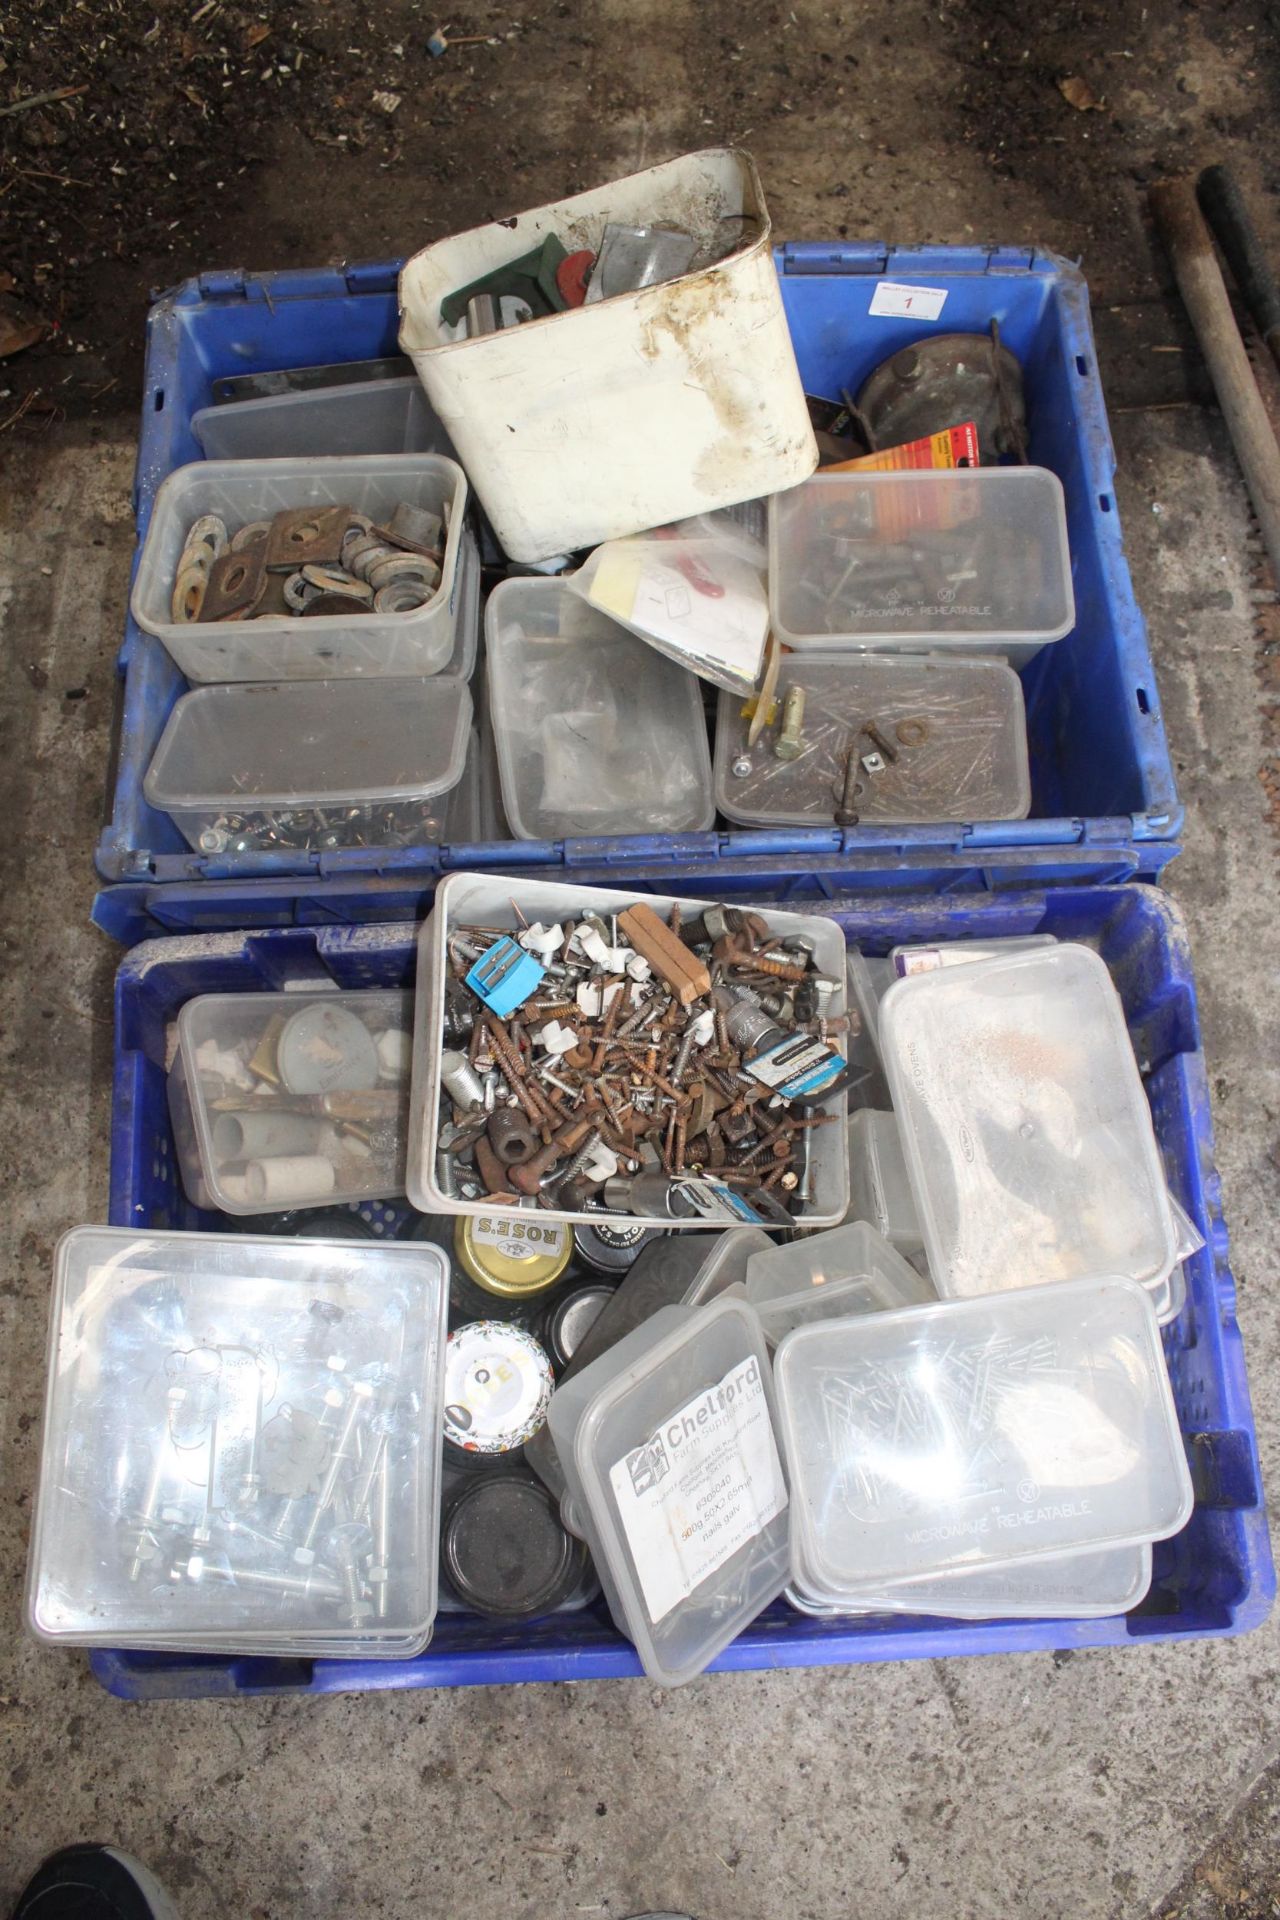 TWO LARGE BOXES OF ASSORTED HARDWARE TO INCLUDE NUTS, BOLTS, NAILS AND SCREWS ETC